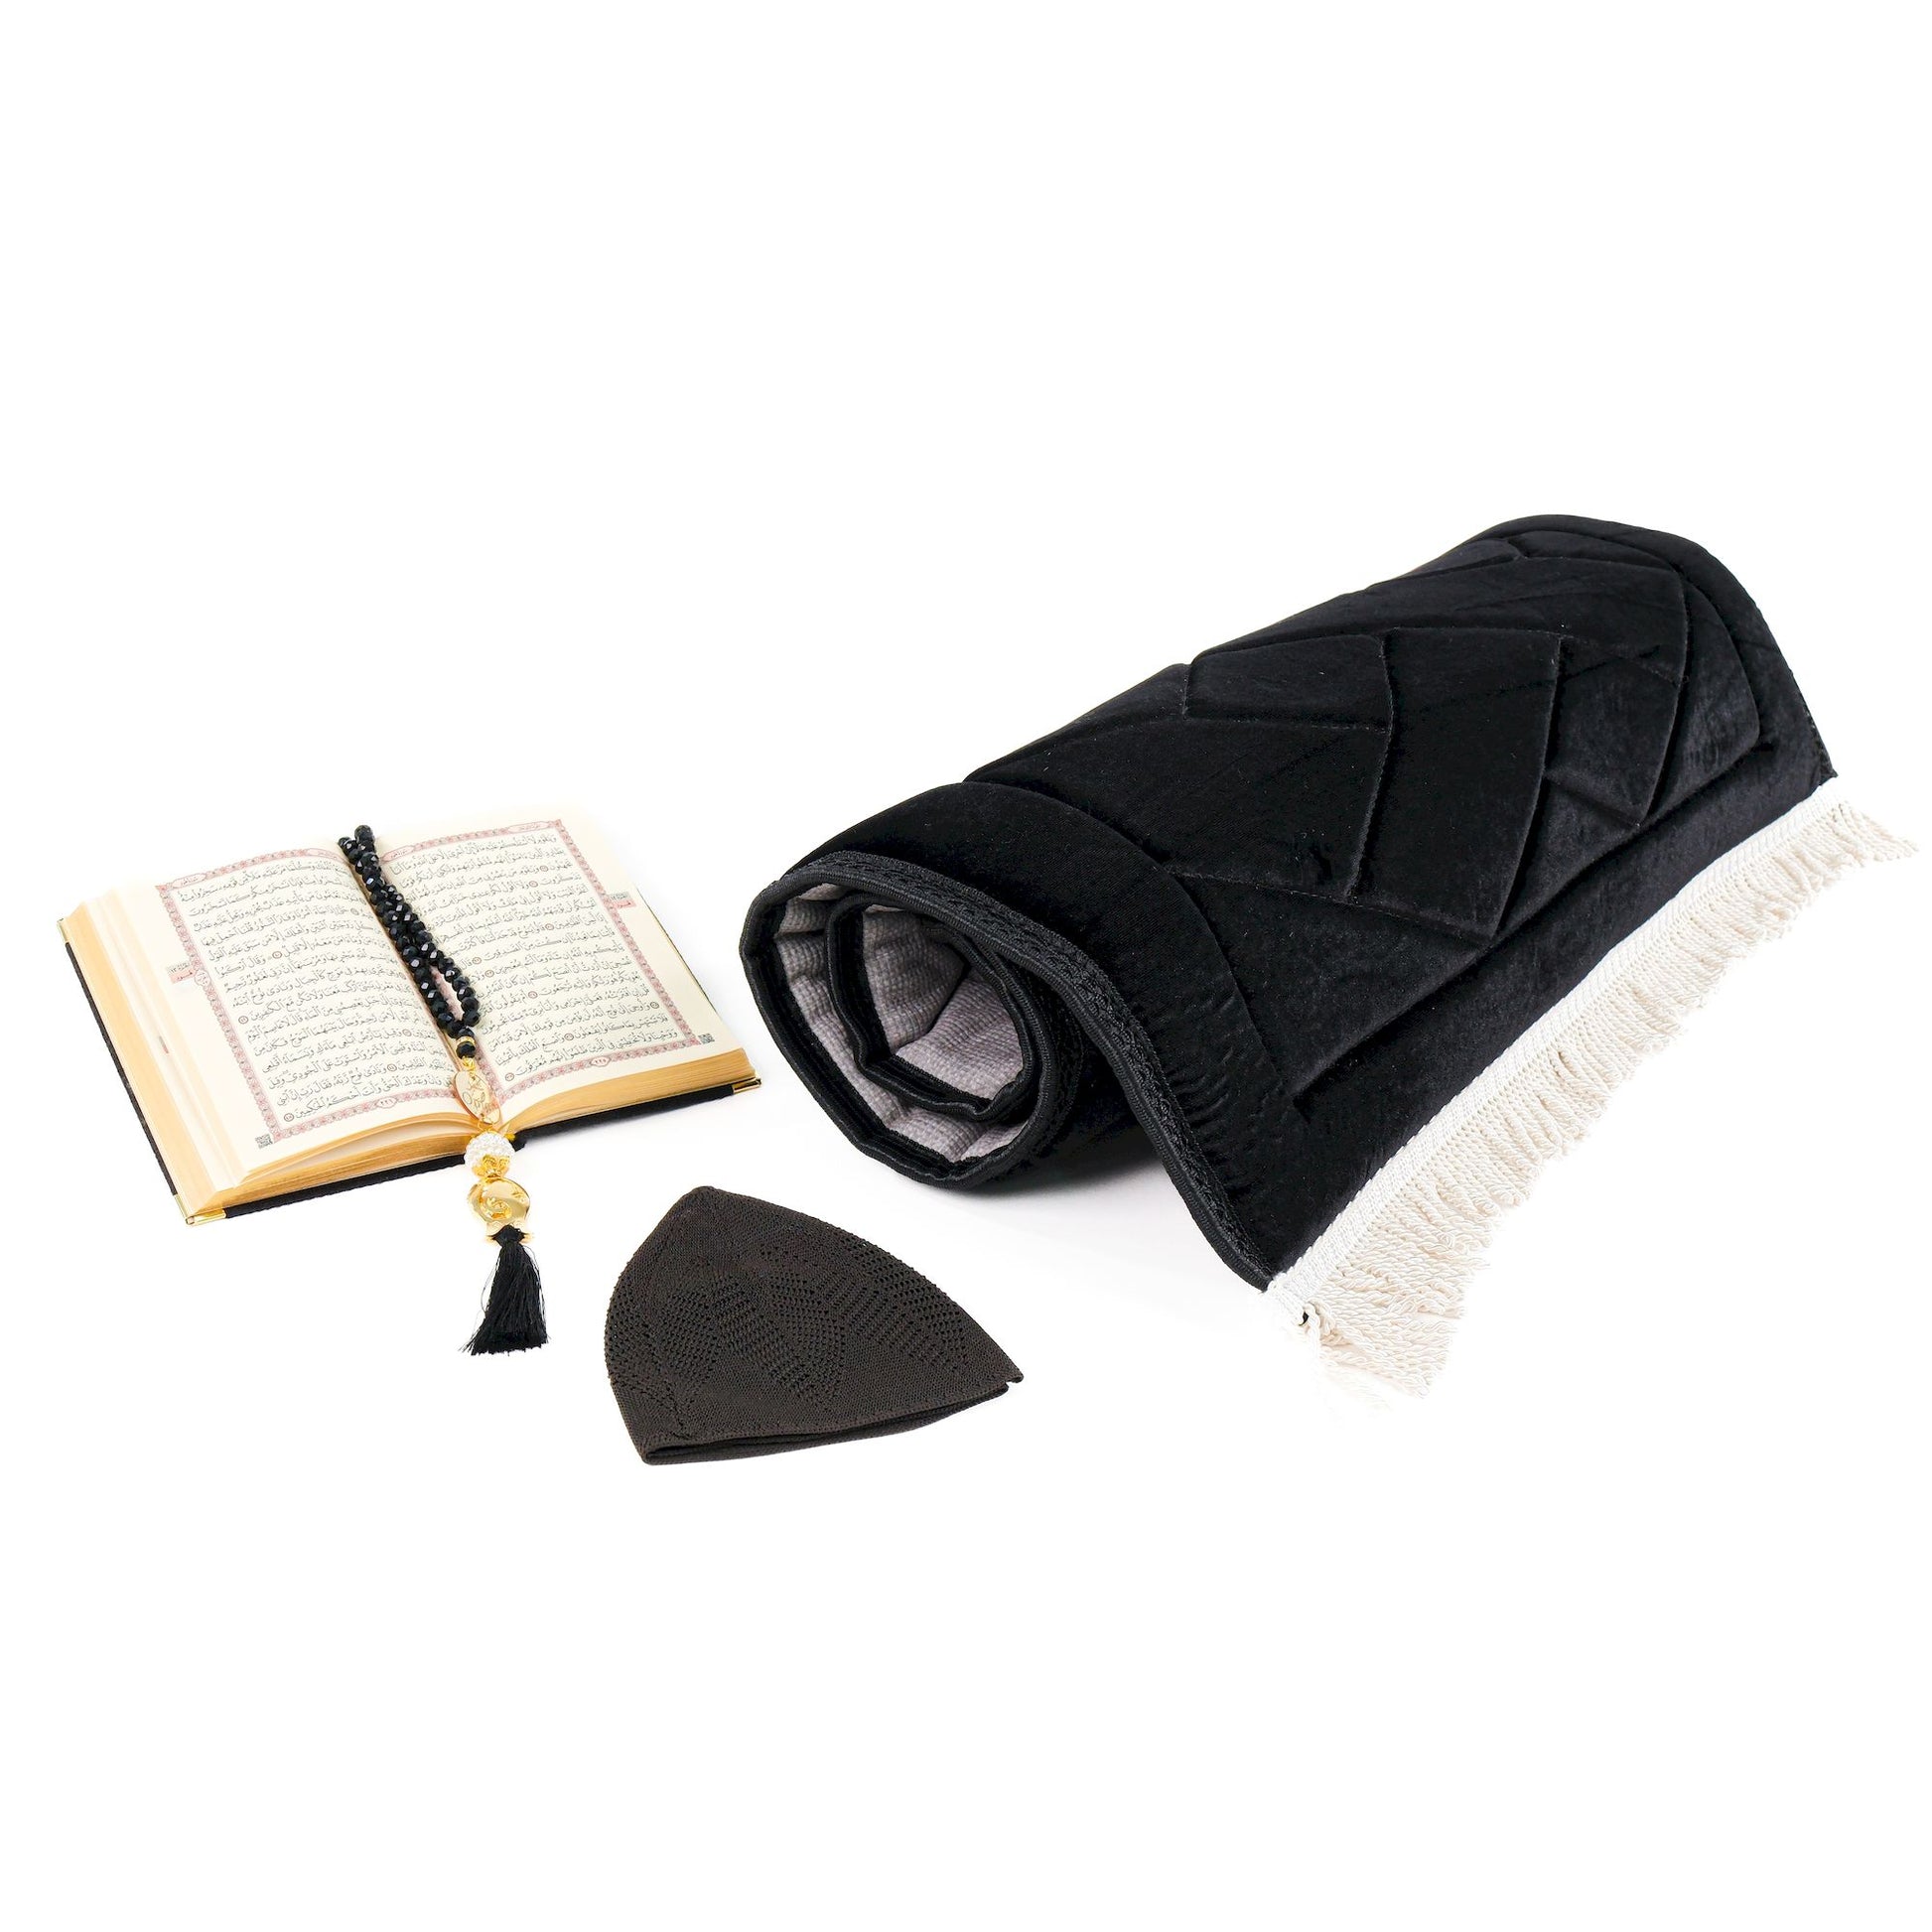 Padded Thick Prayer Mat Quran Tasbeeh Kufi Islamic Muslim Gift Set - Islamic Elite Favors is a handmade gift shop offering a wide variety of unique and personalized gifts for all occasions. Whether you're looking for the perfect Ramadan, Eid, Hajj, wedding gift or something special for a birthday, baby shower or anniversary, we have something for everyone. High quality, made with love.